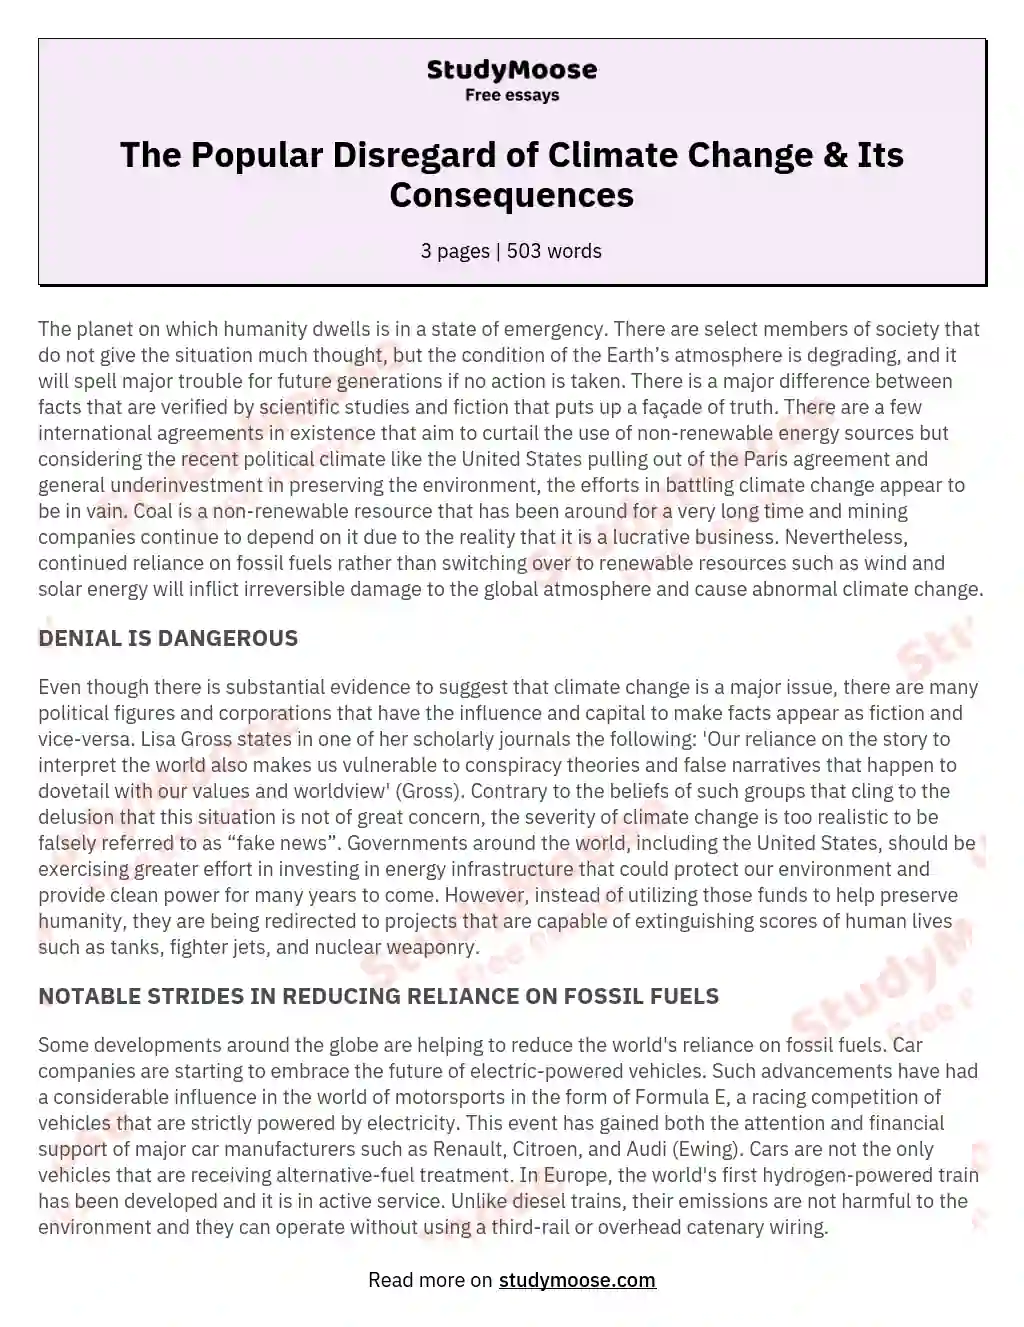 The Popular Disregard of Climate Change & Its Consequences essay